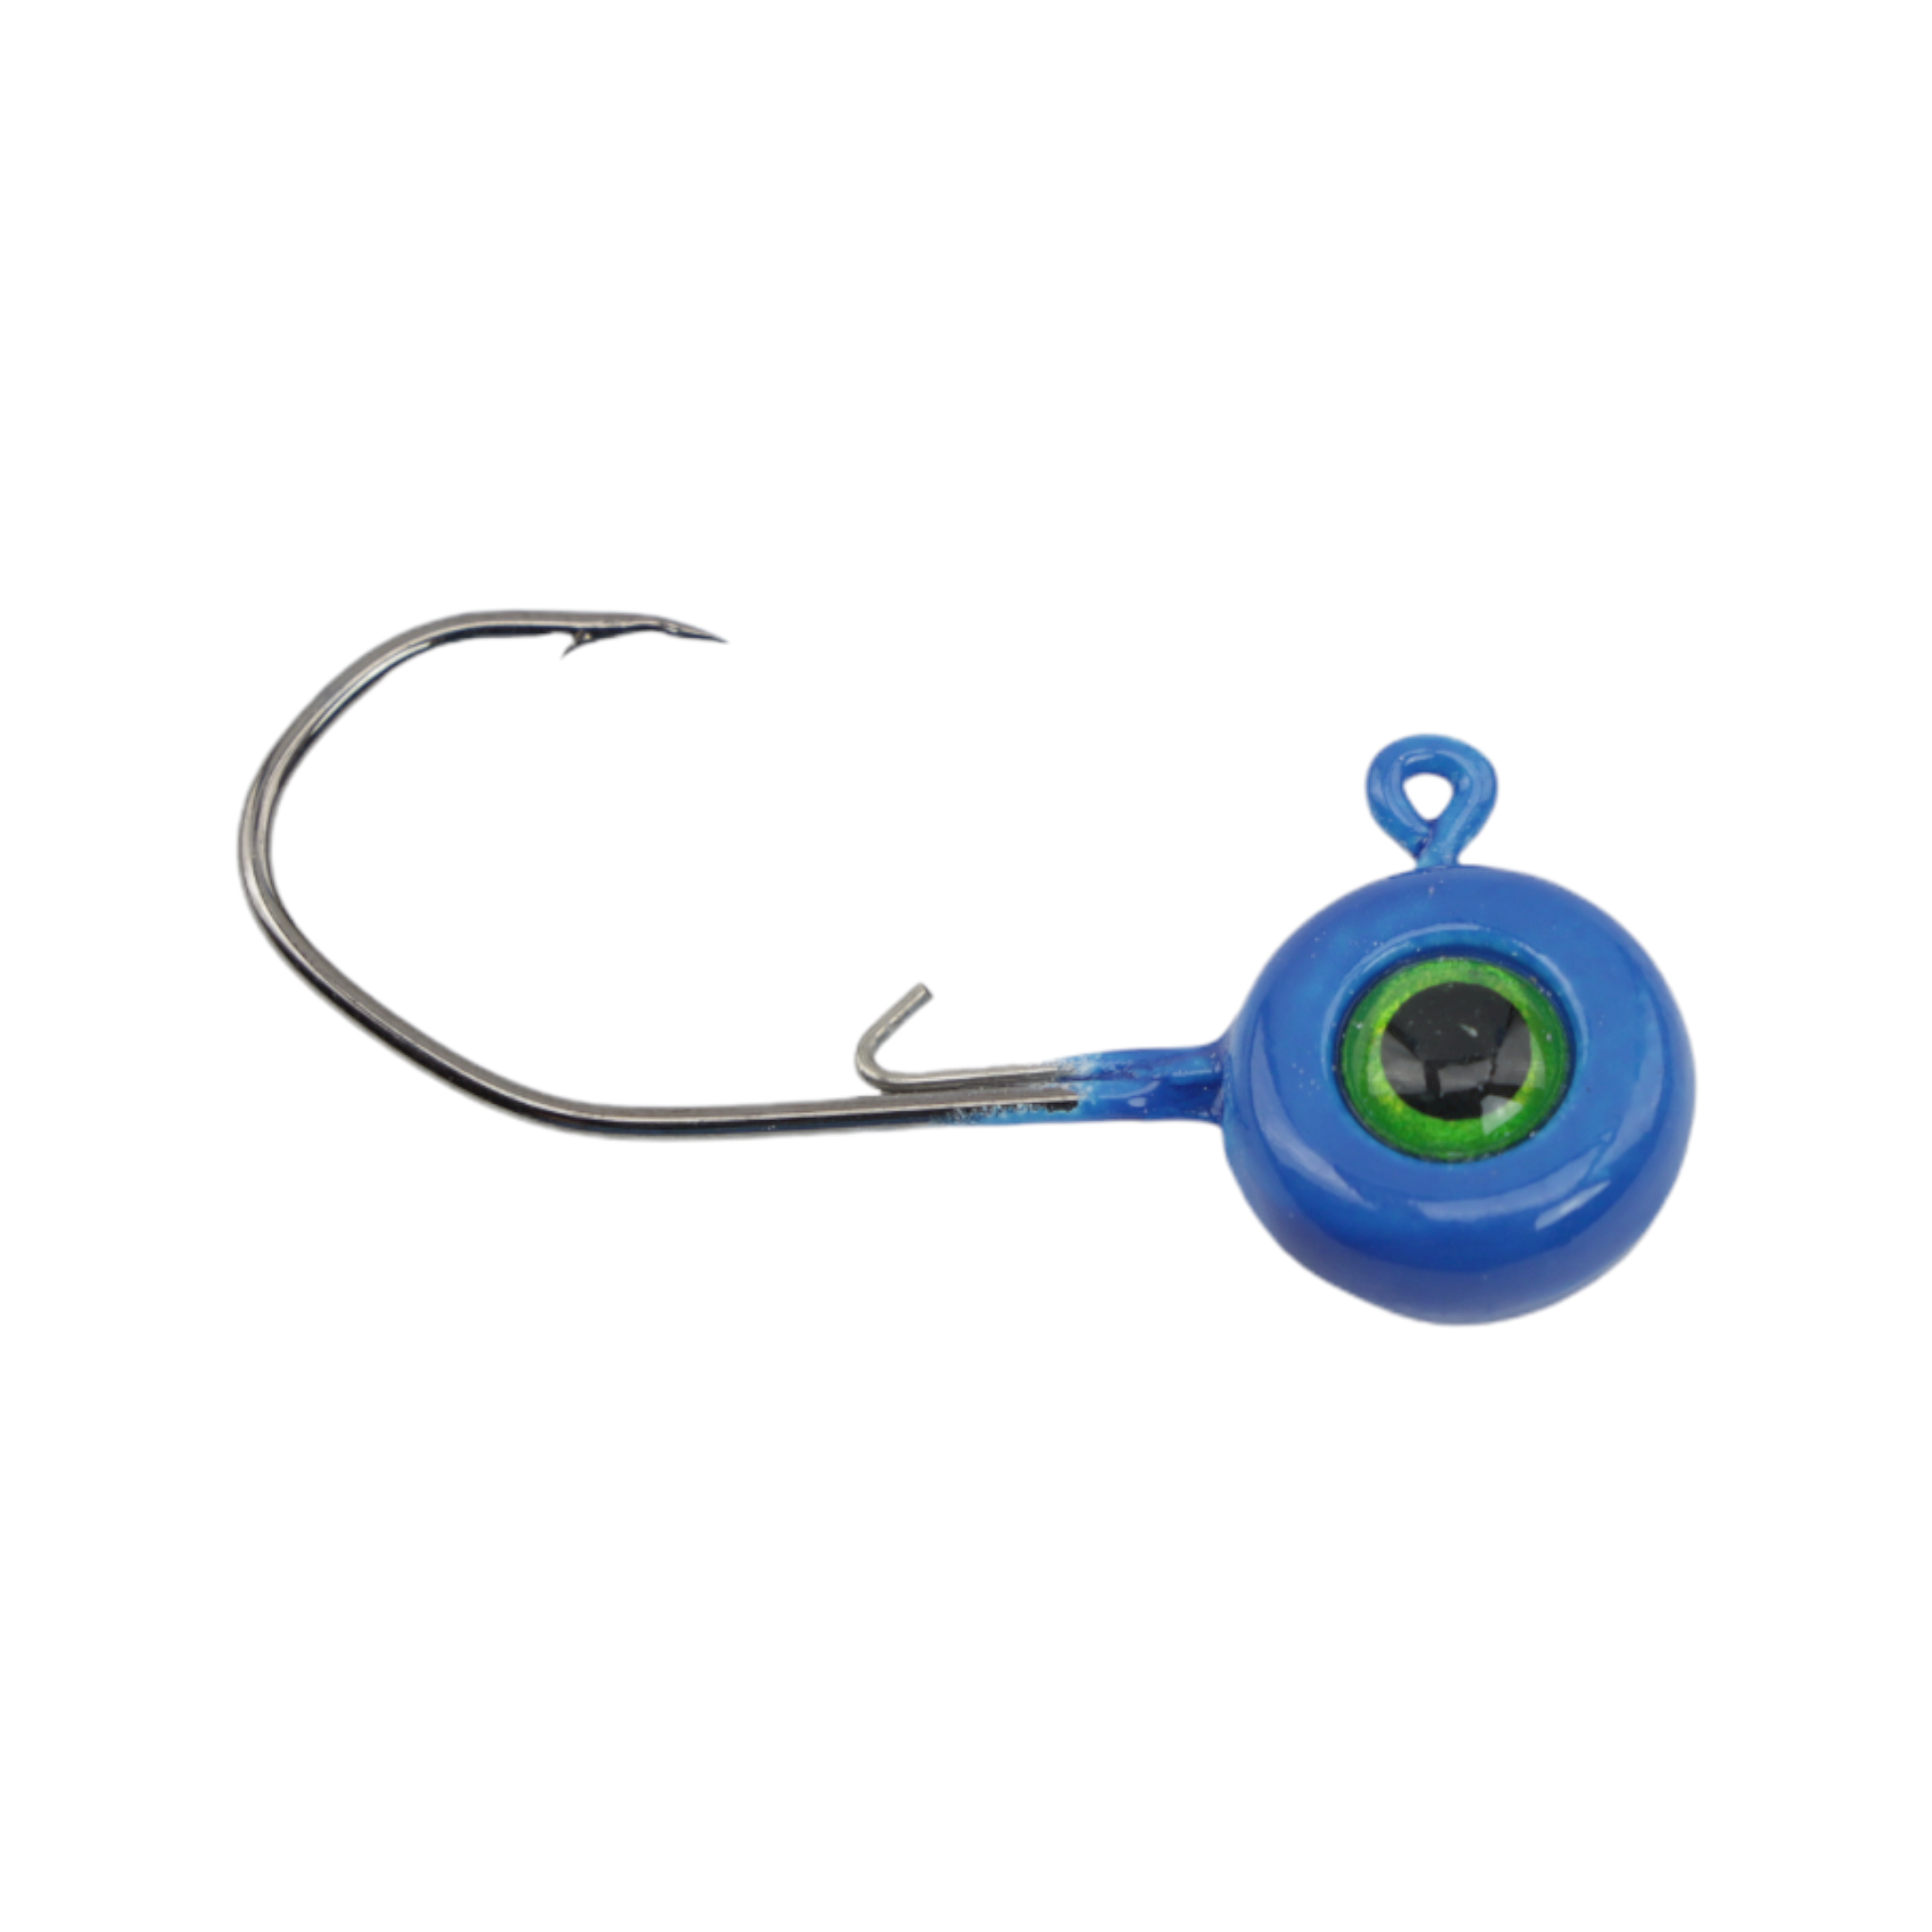  MUCOS Stand Up Jig Head Kit, Crappie Jig Head for